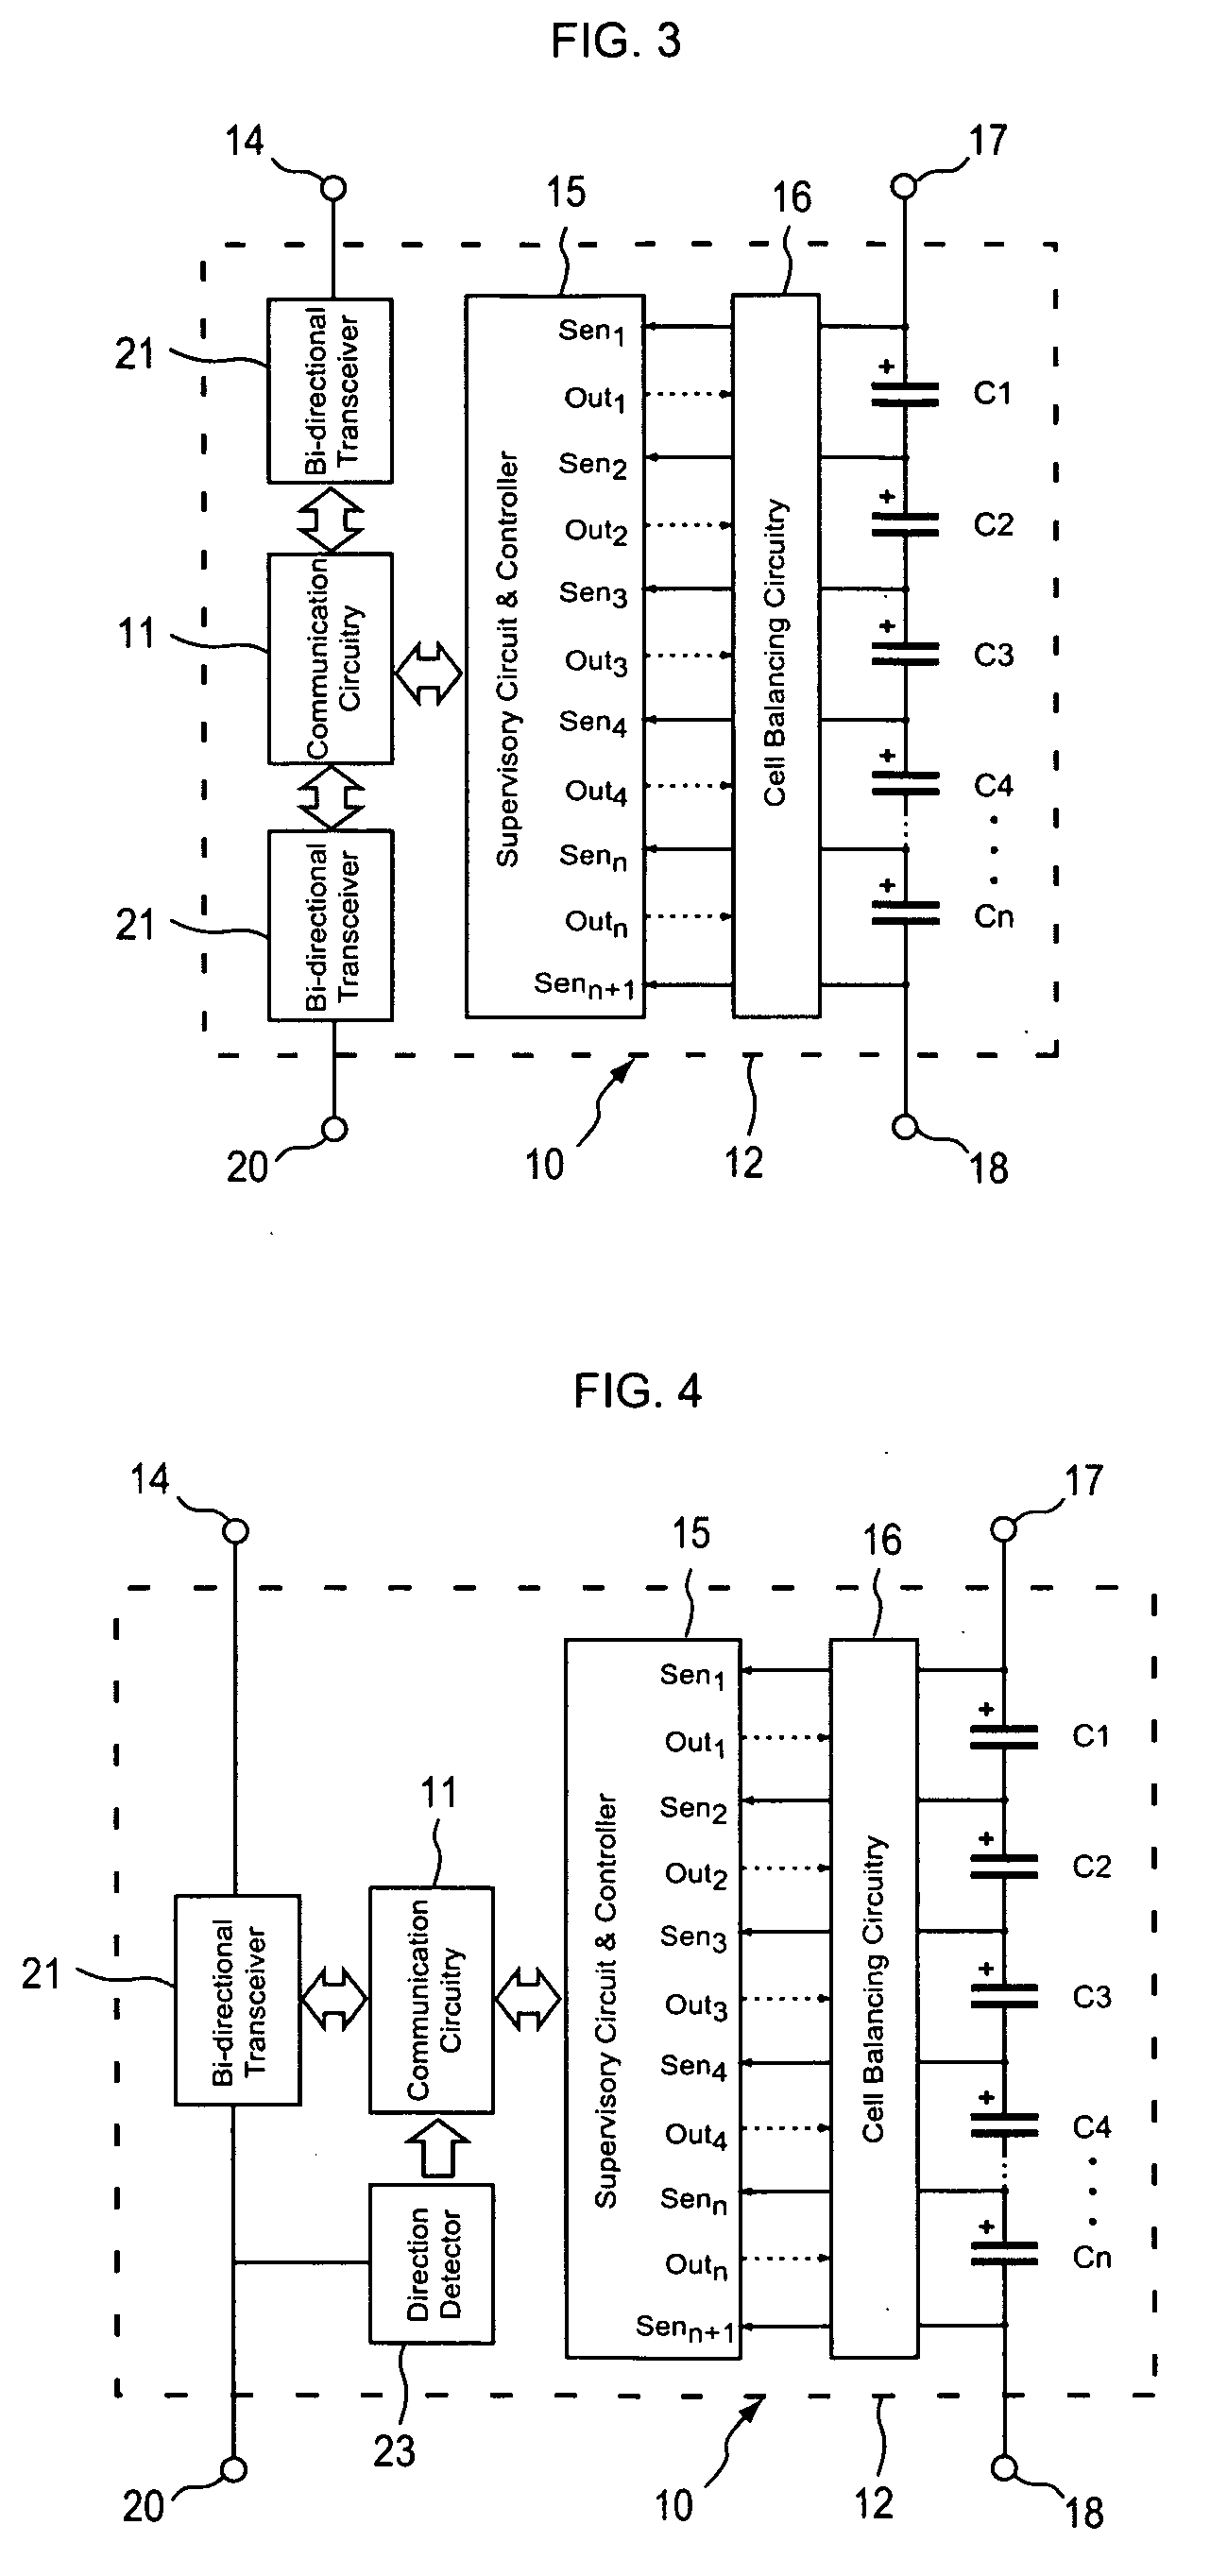 Distributed networks of electric double layer capacitor supervisory controllers and networks thereof